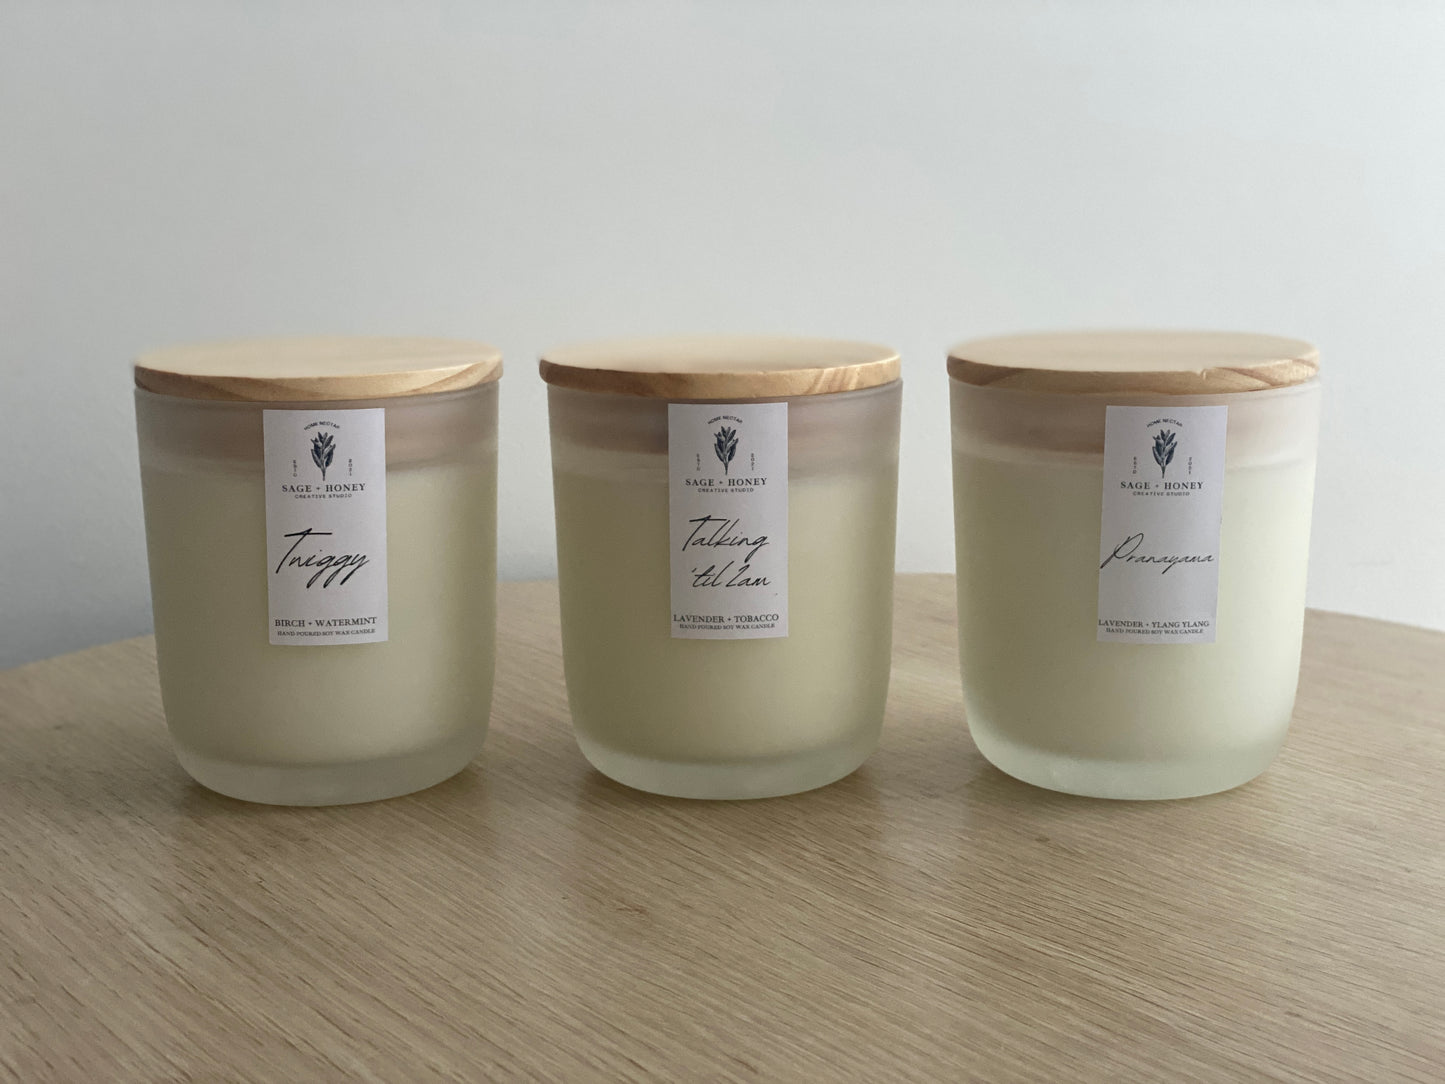 Frosted Candle 'Tasting' Trio - Choose your own scents